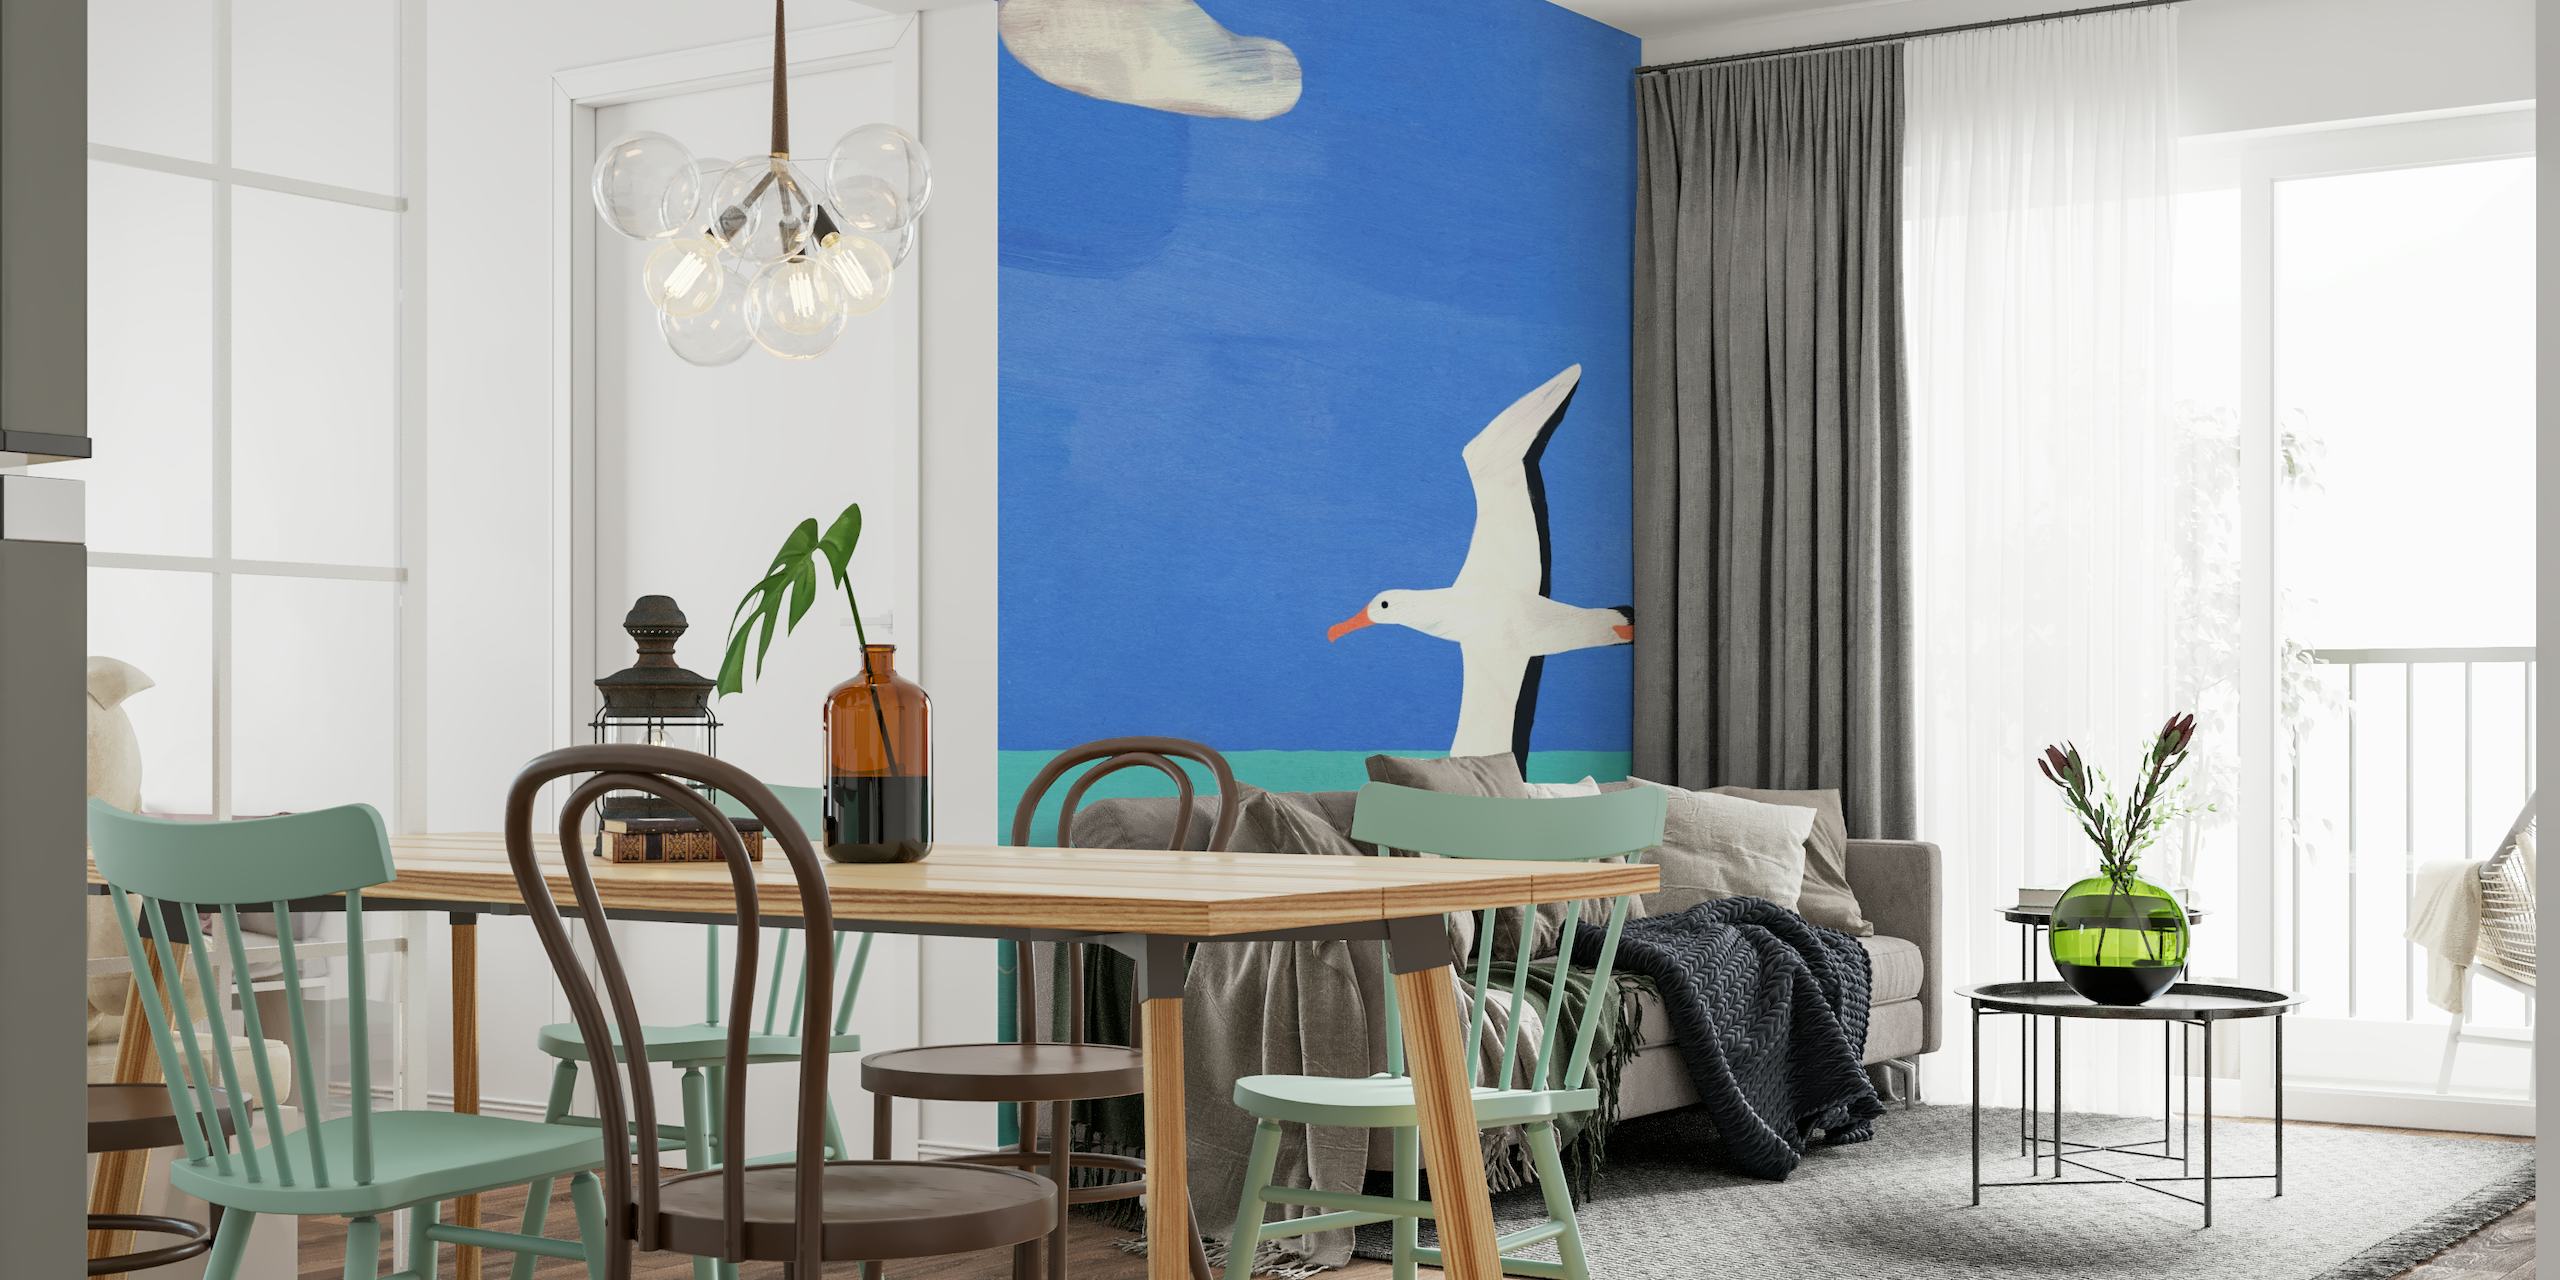 Wall mural of a seagull flying over a stylized blue ocean with a single cloud in the sky, evoking a serene coastal vibe